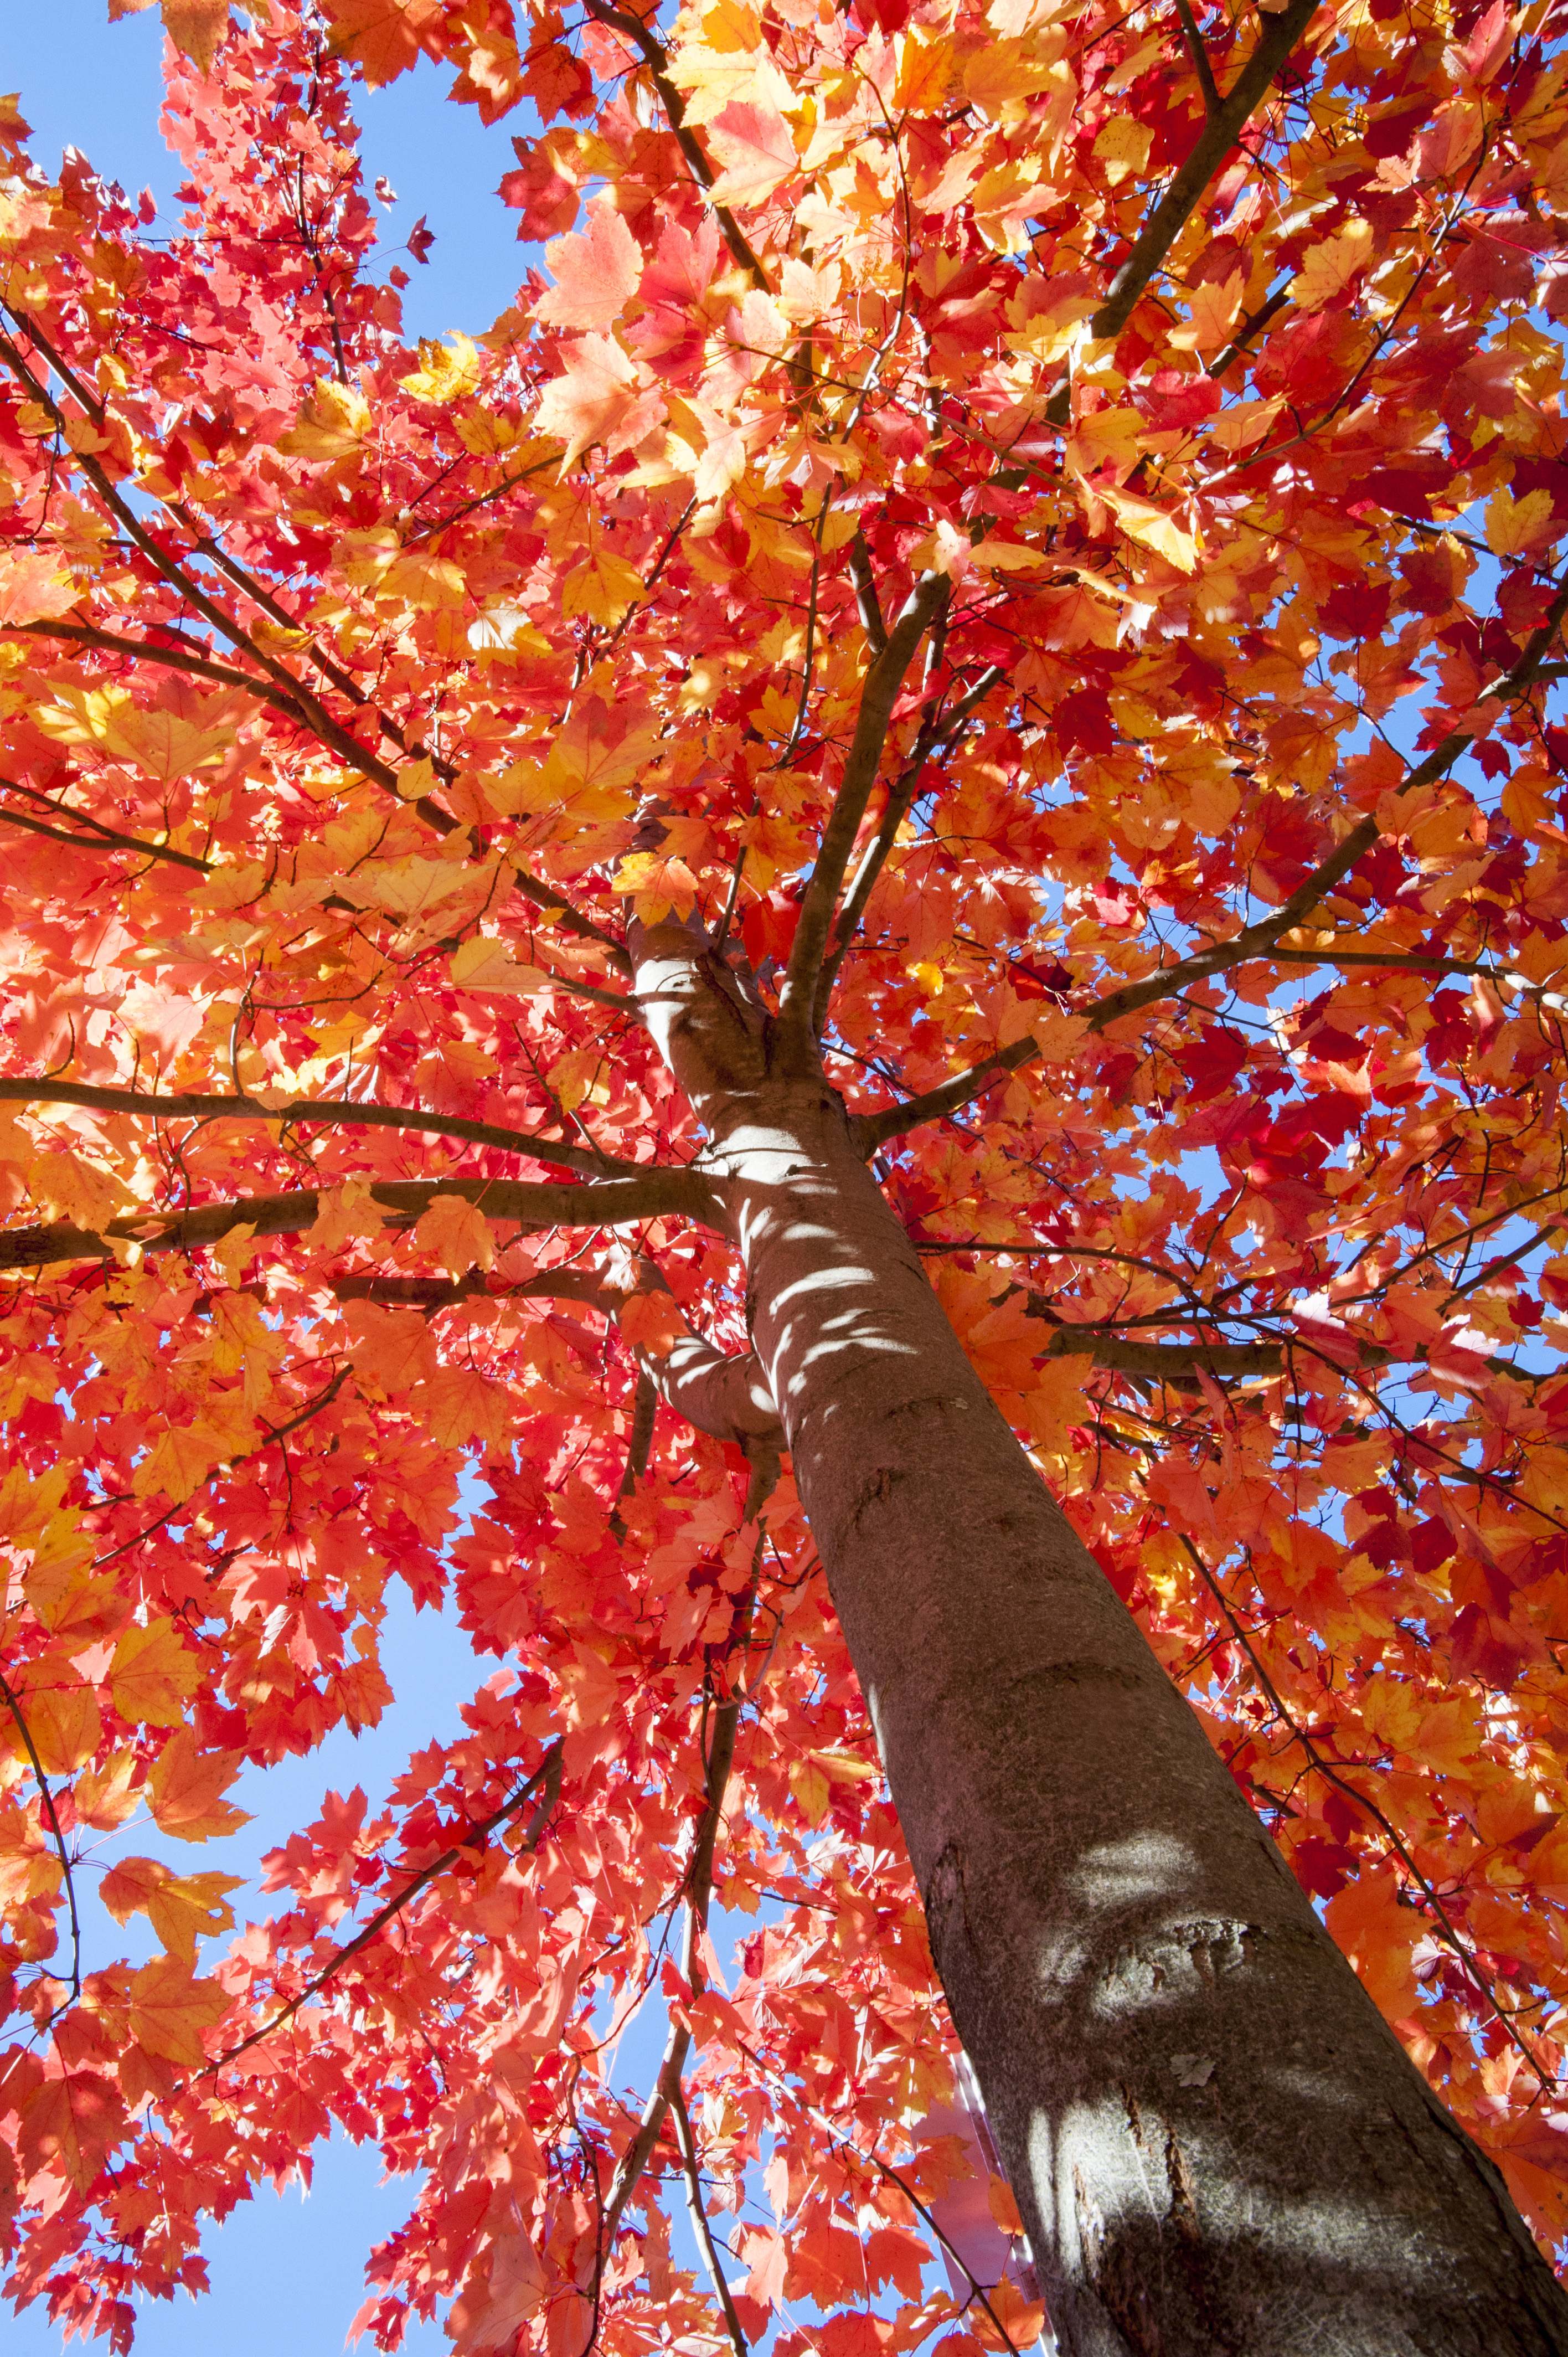 Climate change could affect fall foliage timing